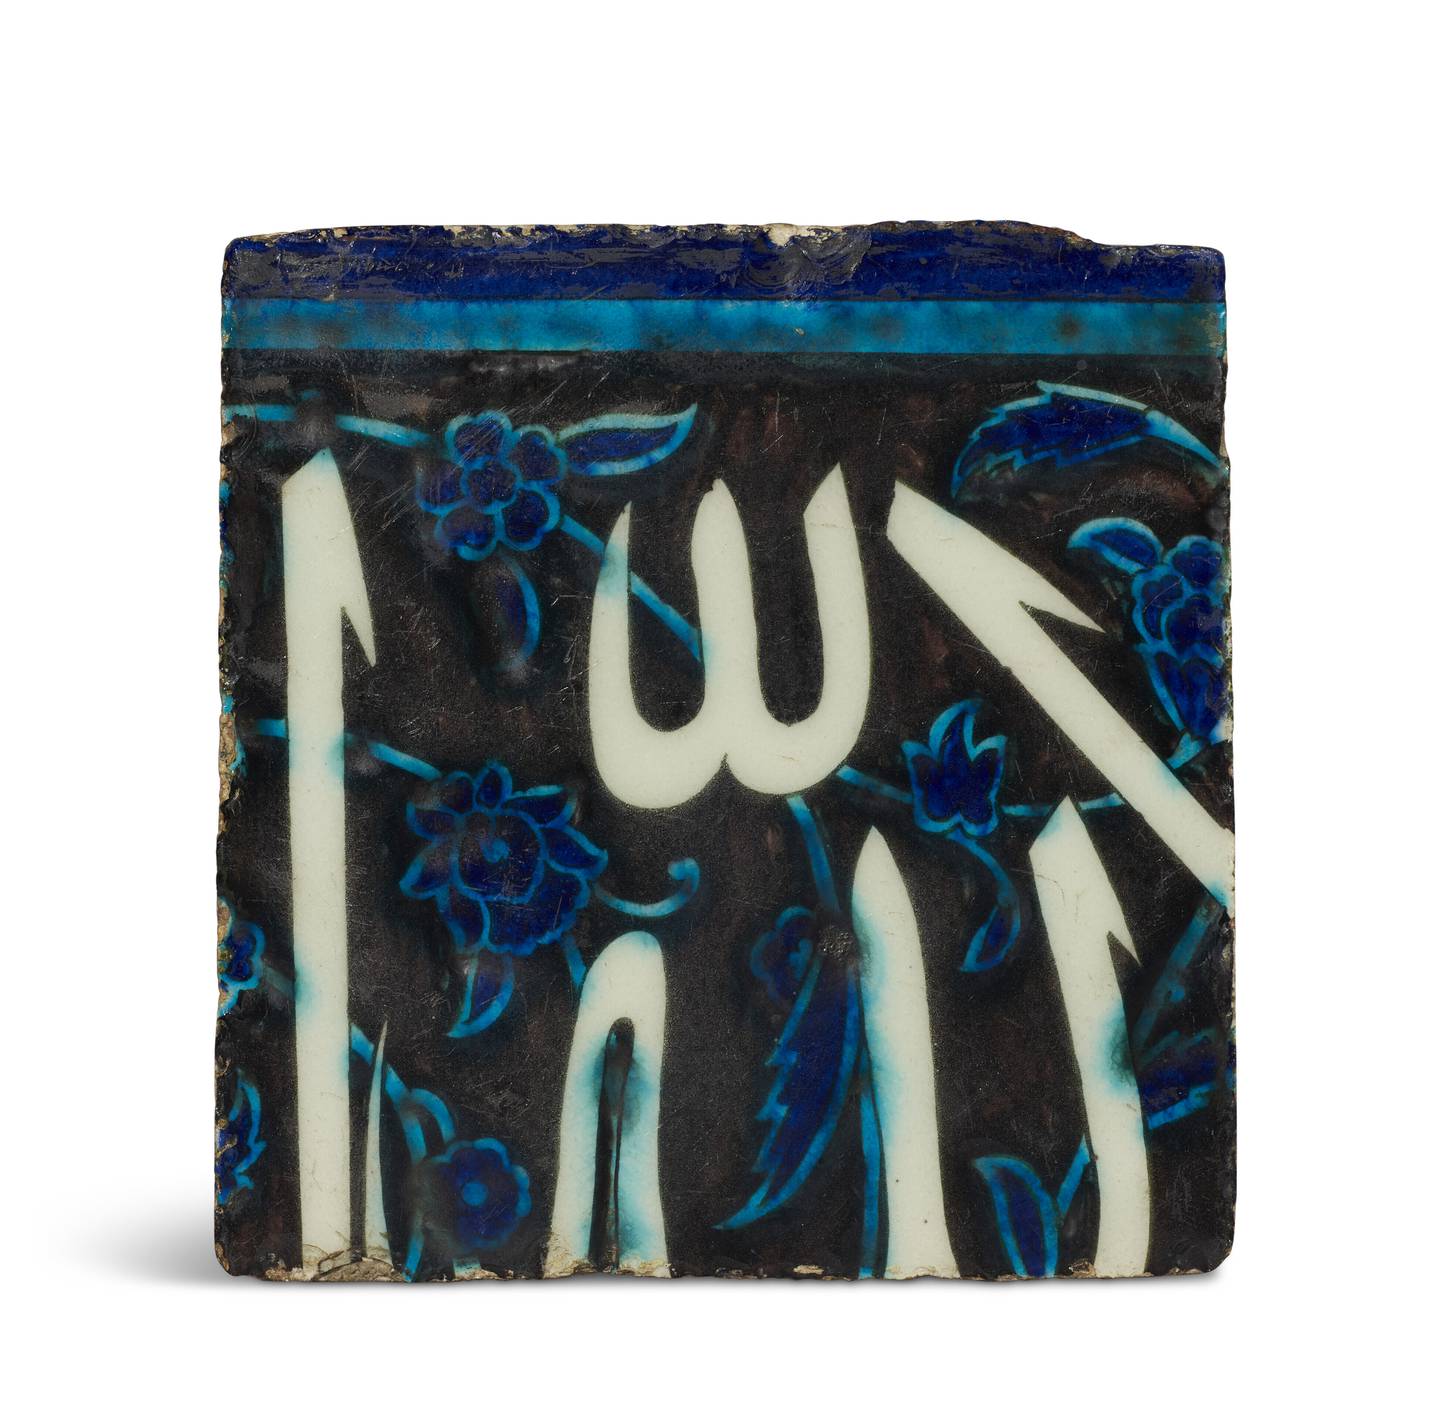 One of Moumni’s personal favourite pieces on display at Christie's at the moment is a white, turquoise and cobalt-blue 'Dome of the Rock' 17.5cm x 18cm mid-16th-century ceramic tile made in Ottoman Syria or Palestine with an inscription in thuluth visible against a background of flowering vines. Photo: Christie's
